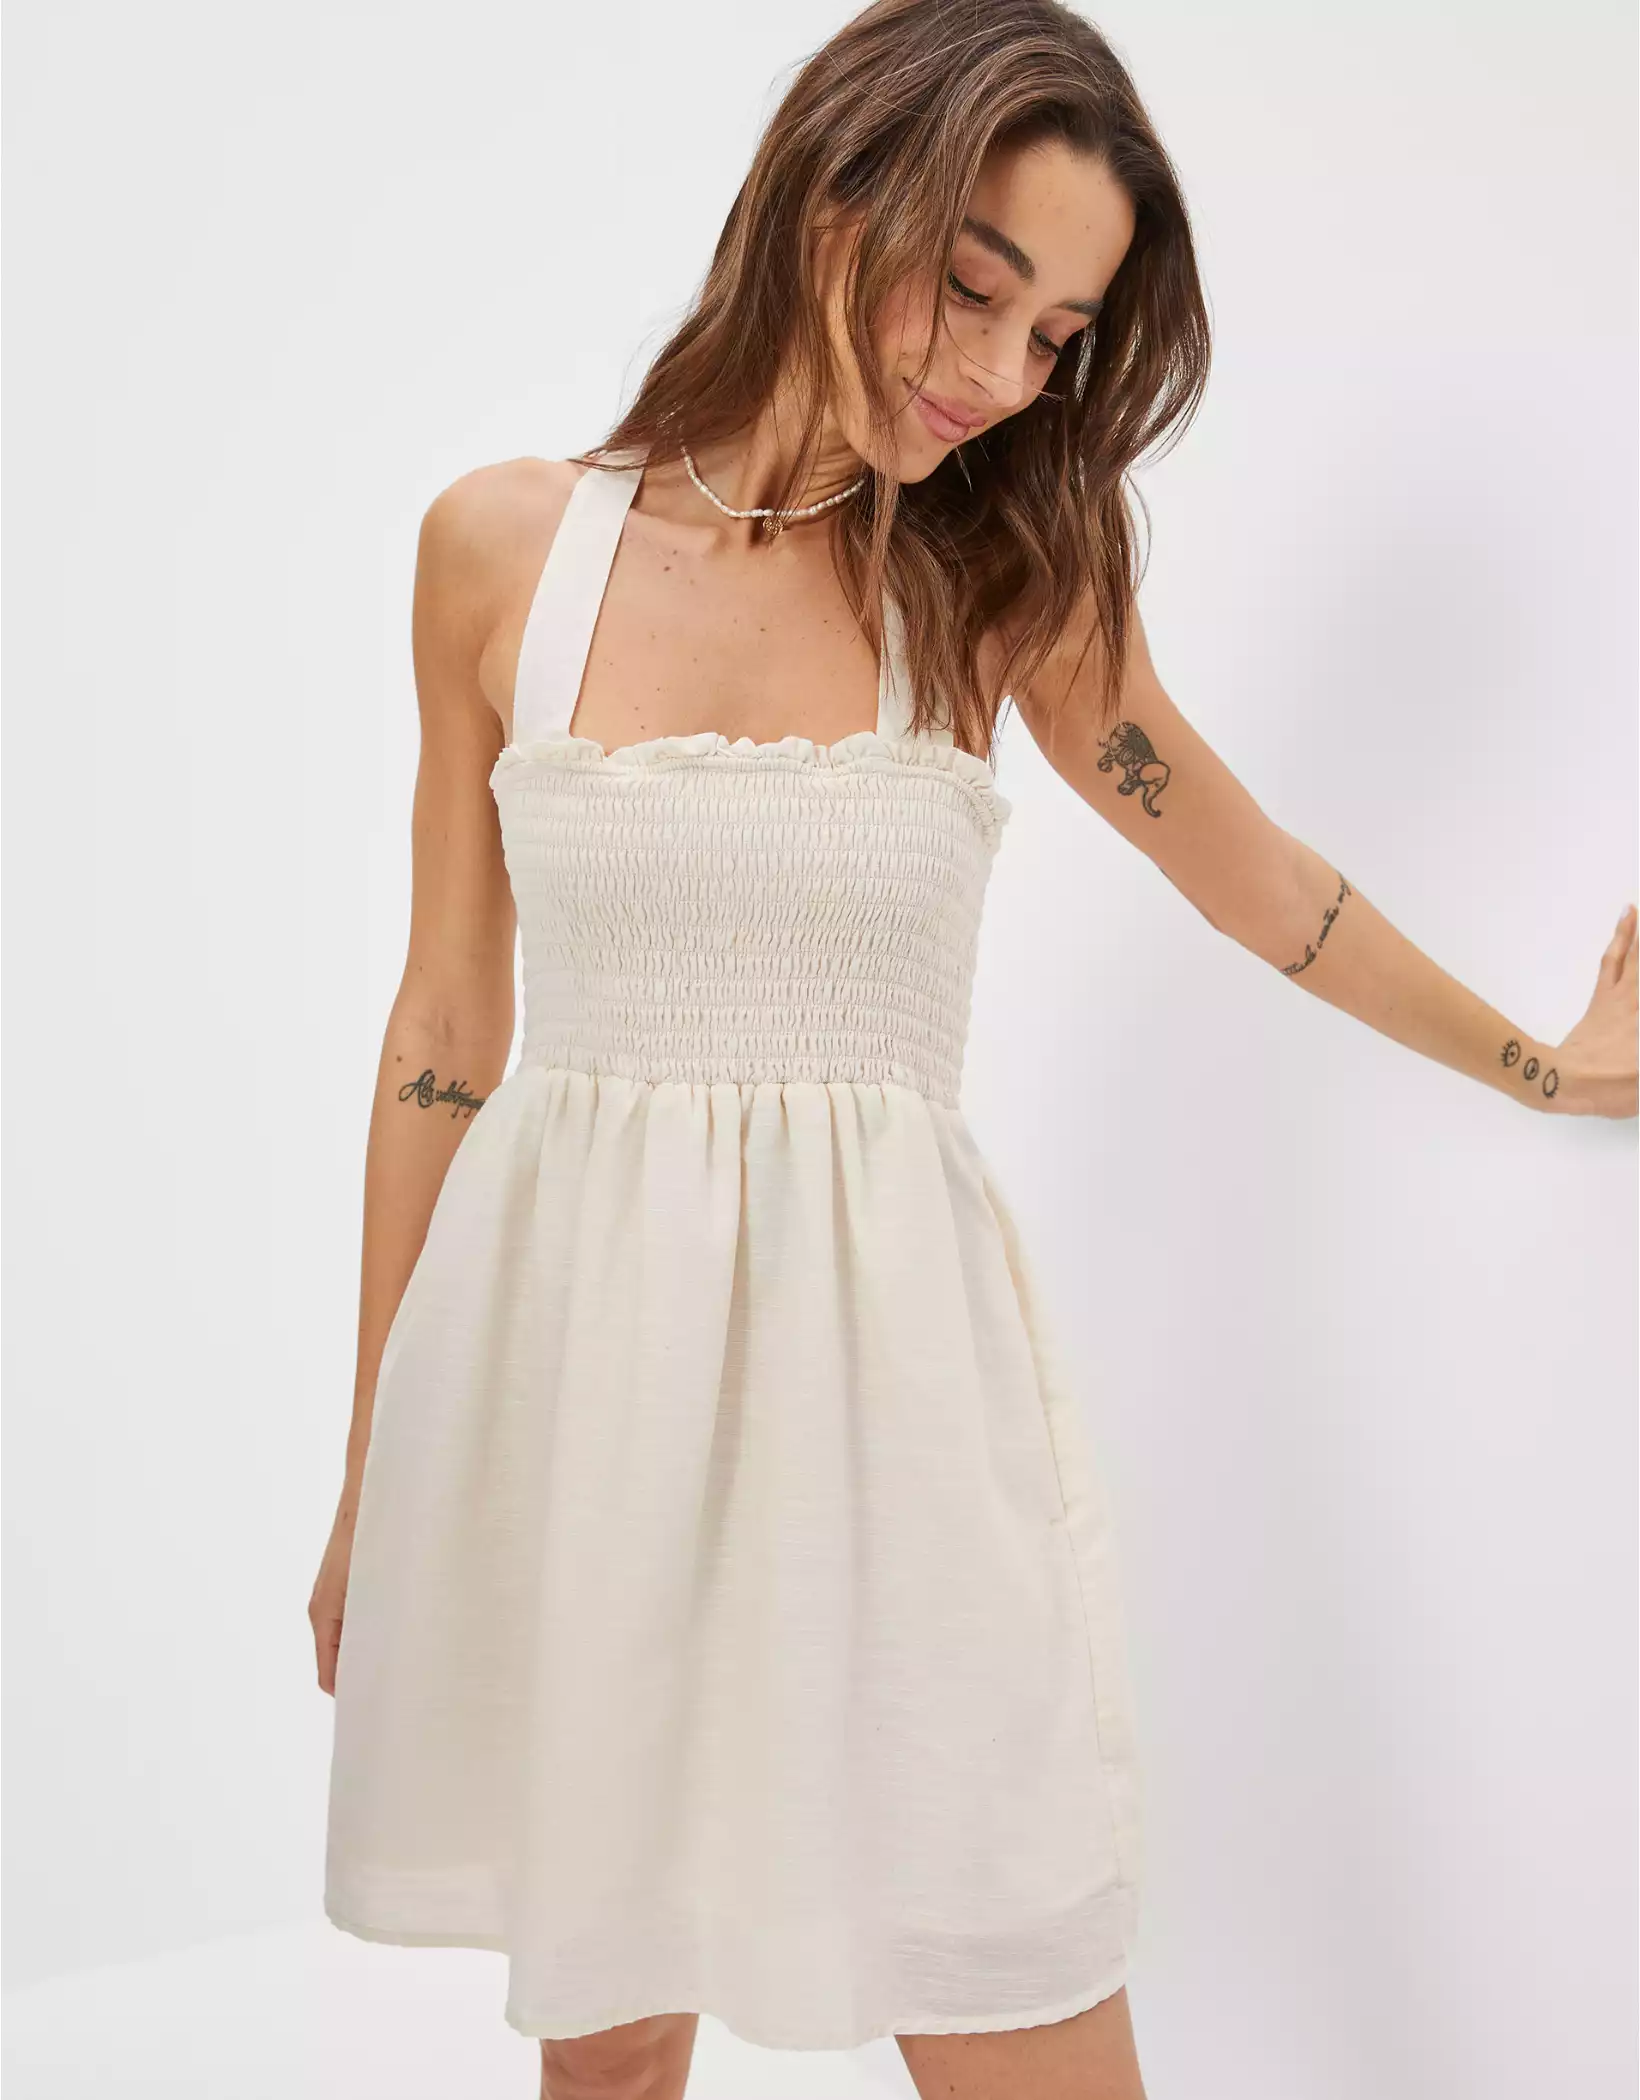 Dress from Aerie